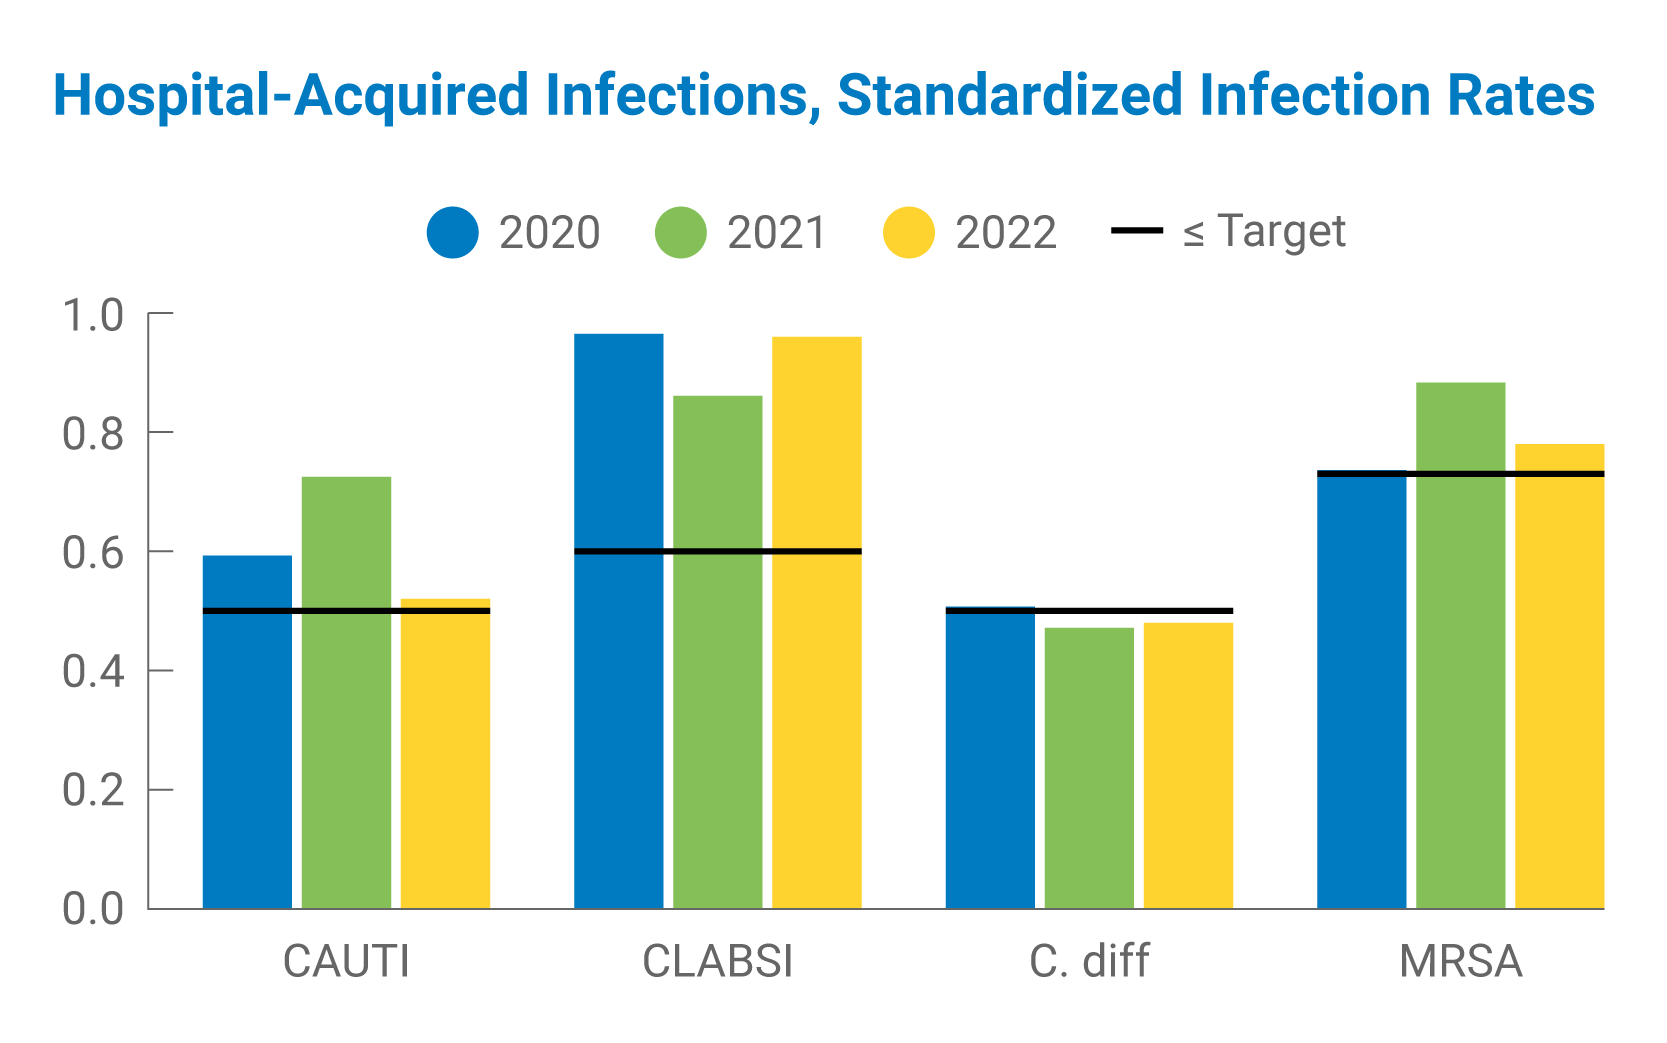 Hospital-acquired infections, standardized infection rates.